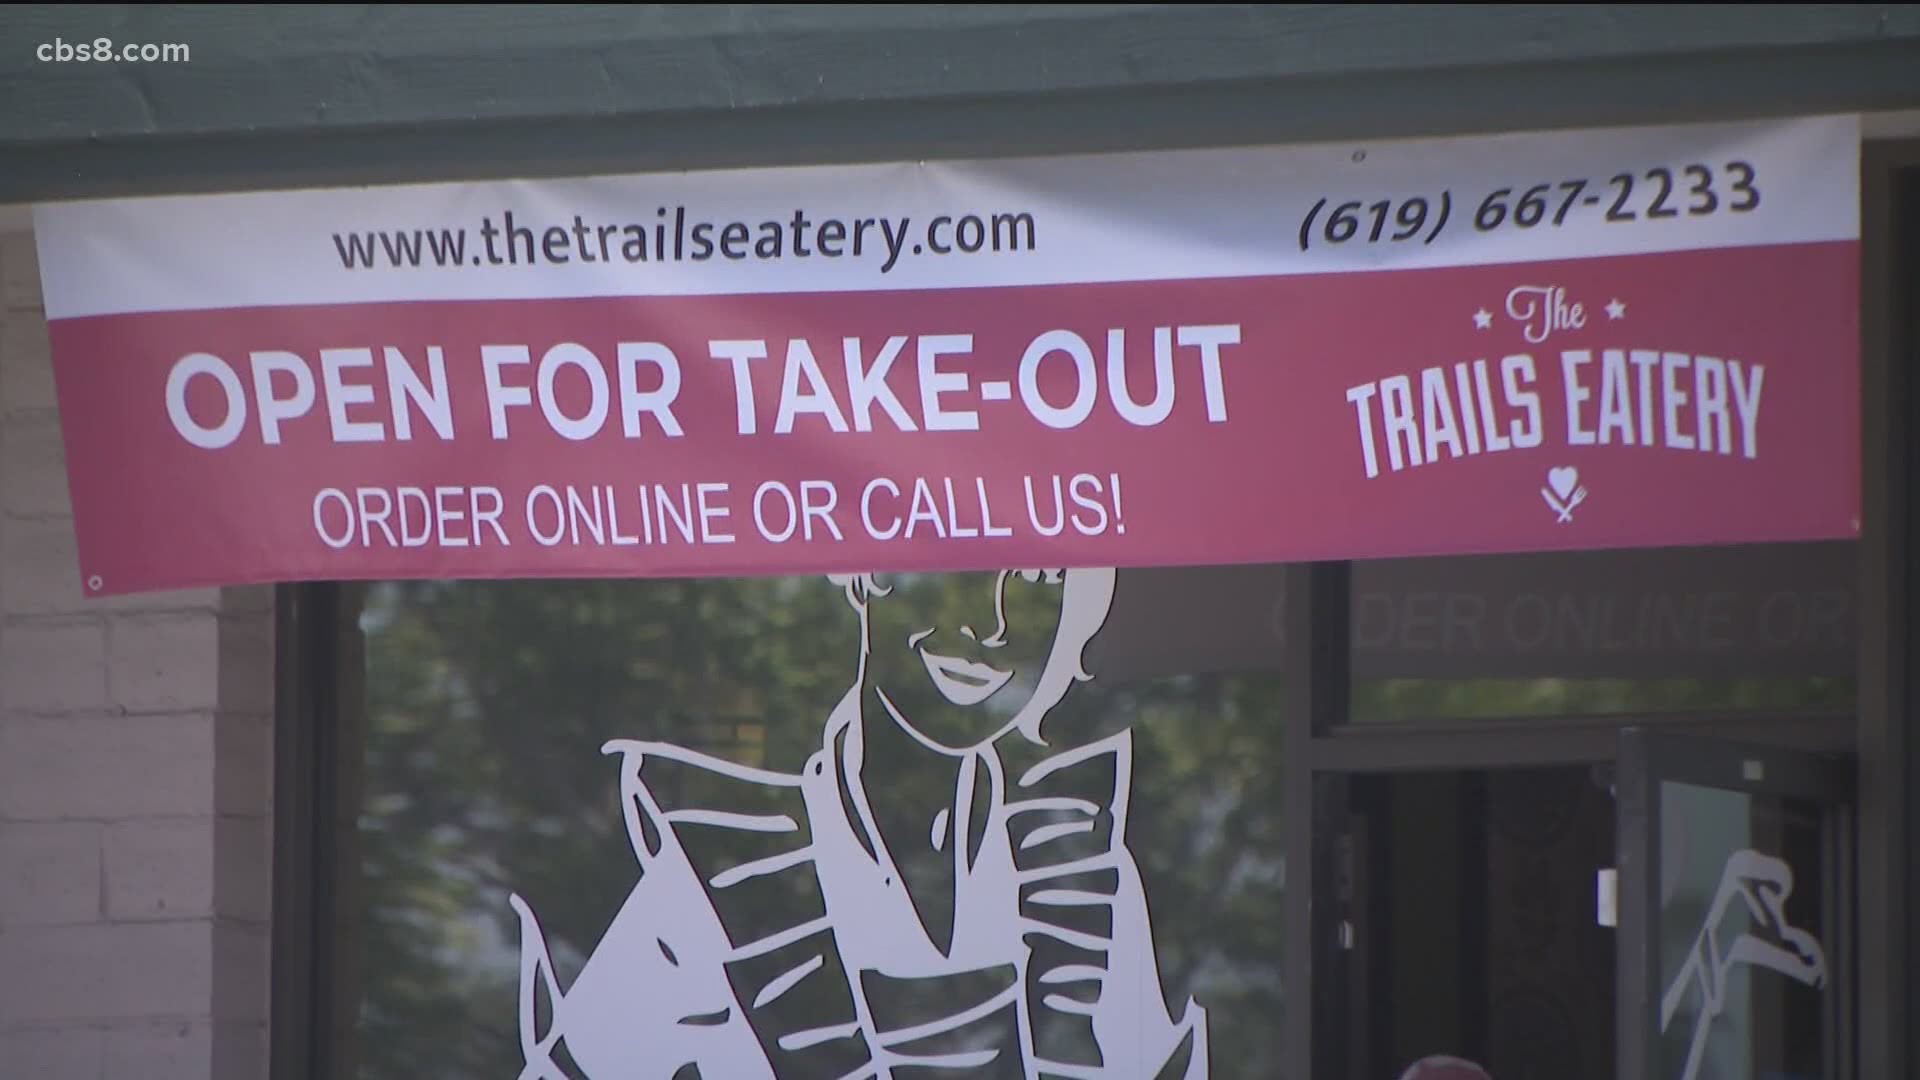 The Trails Eater in San Carlos reopened Sunday after almost two months of being closed. They had never done take-out before but needed to start to stay afloat.